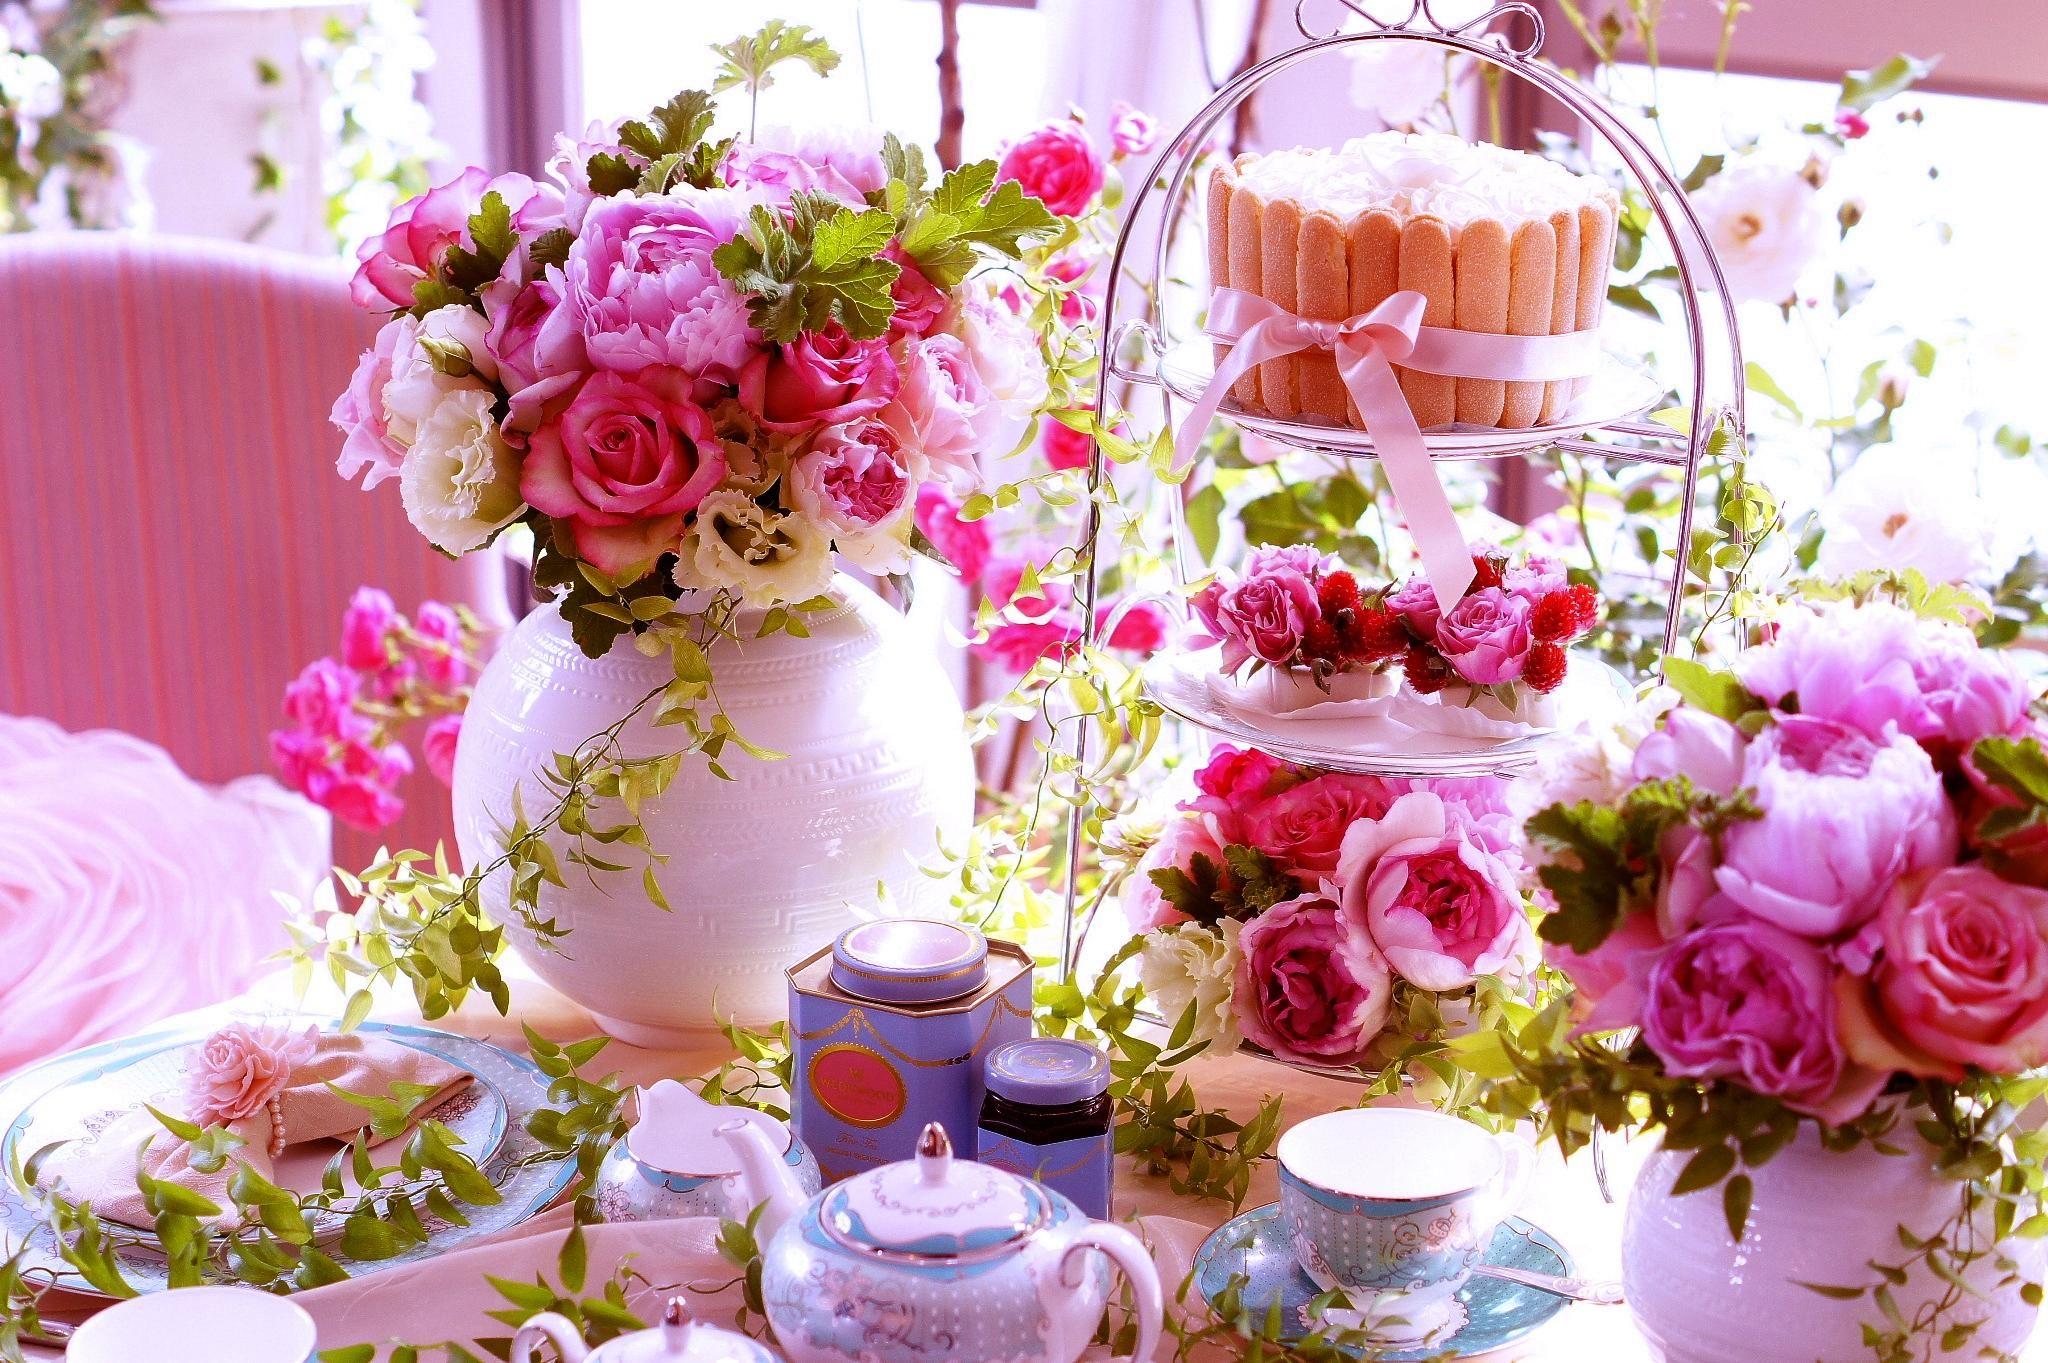 THE TEA PARTY WALLPAPERS FREE Wallpaper & Background image